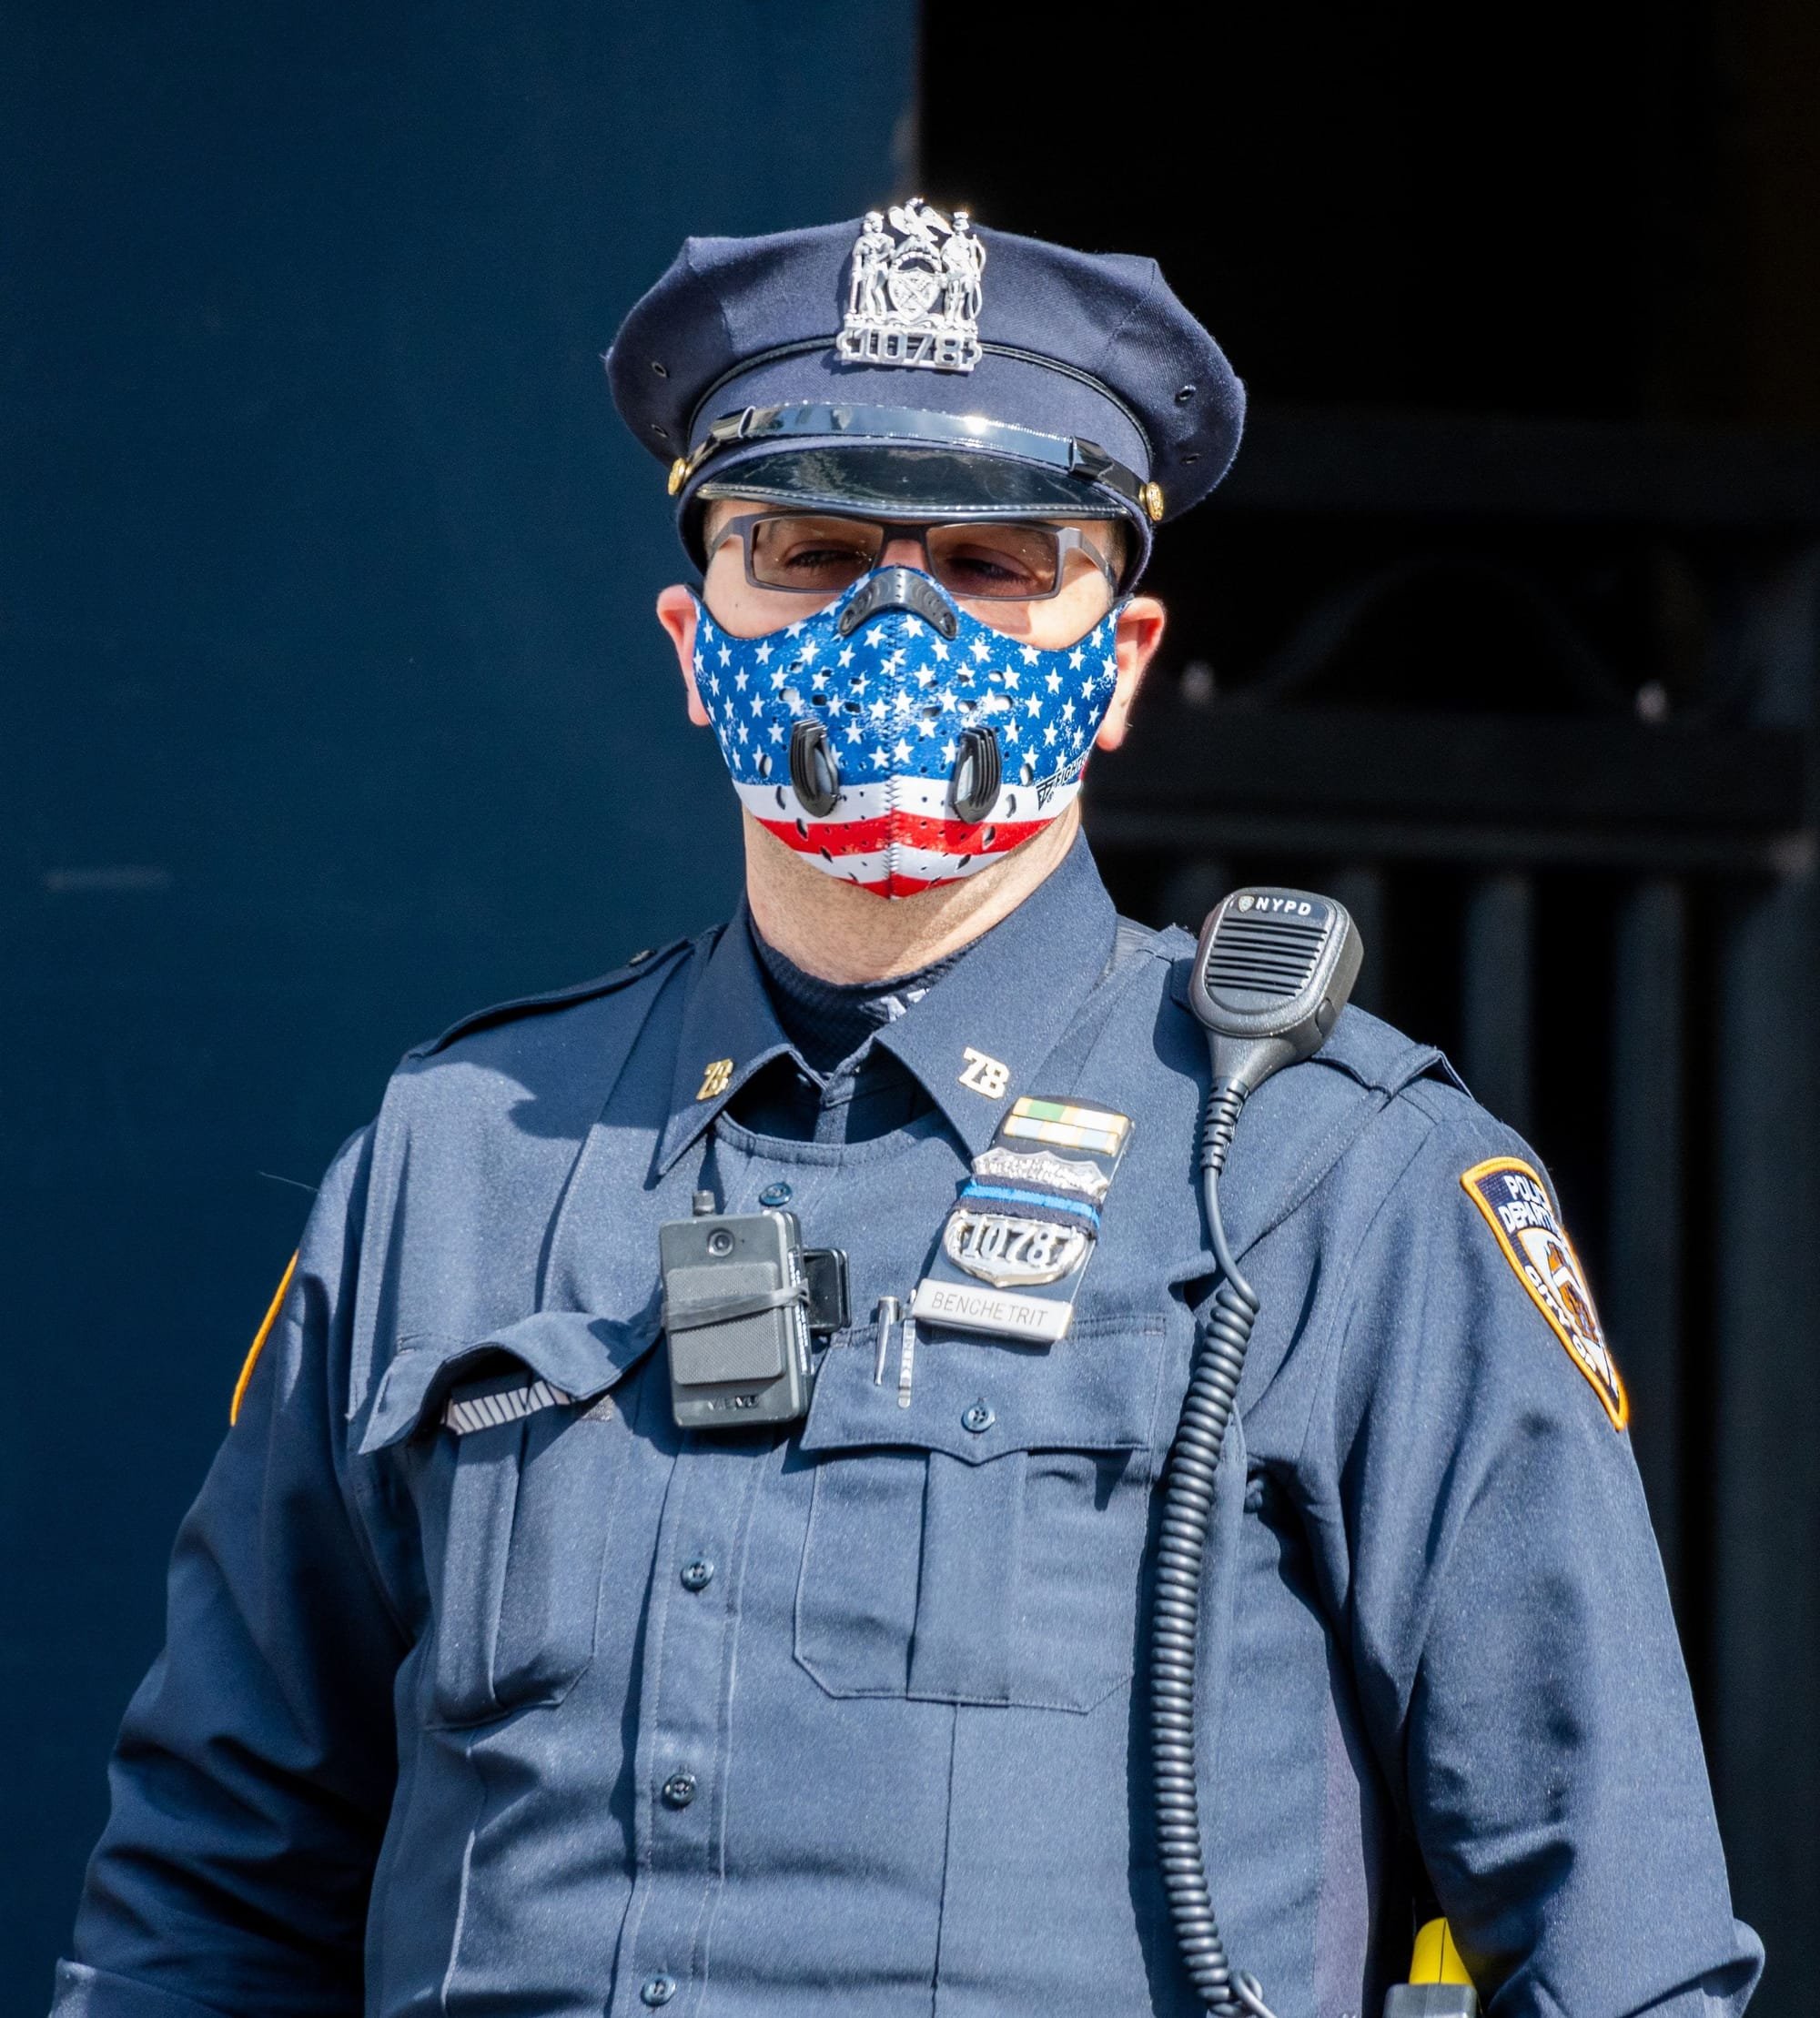 San Francisco police chief nixes officers' 'Thin Blue Line' masks.